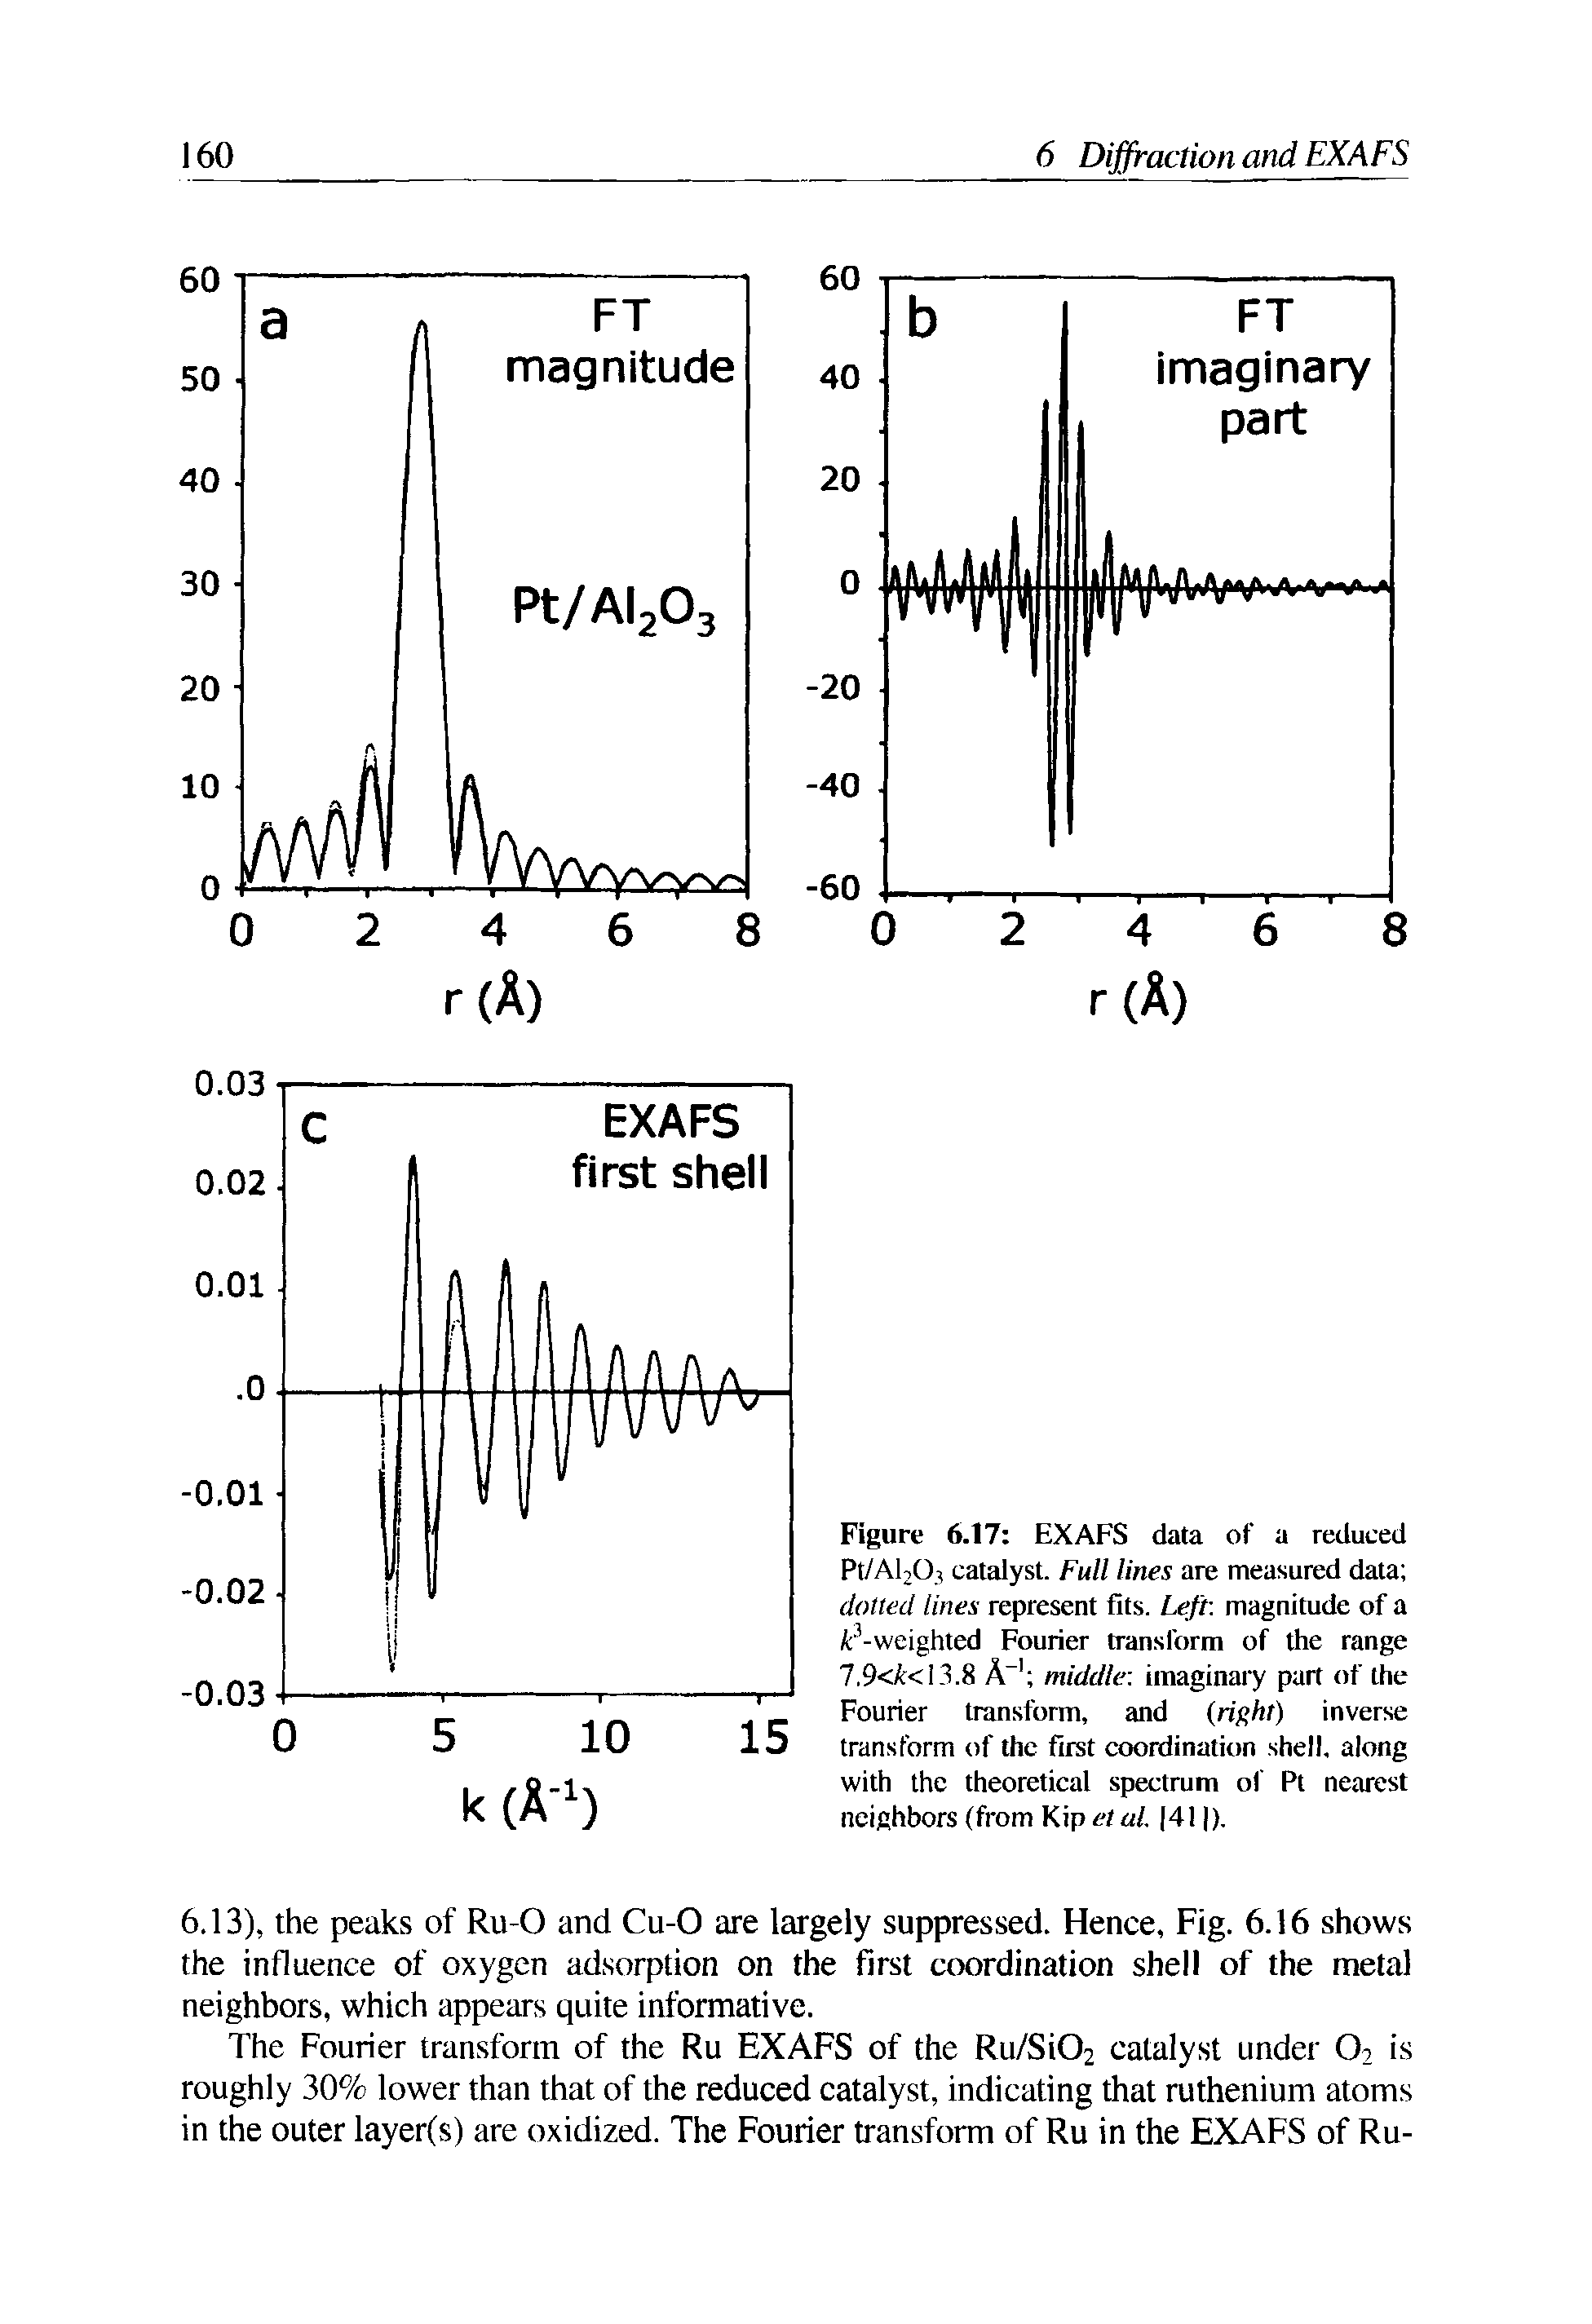 Figure 6.17 EXAFS data of a reduced Pt/AEO catalyst. Full lines are measured data dotted lines represent fits. Left magnitude of a -weighted Fourier transform of the range 1,9<k< 13.X A-1 middle-, imaginary part of the Fourier transform, and (right) inverse transform of the first coordination shell, along with the theoretical spectrum of Pt nearest neighbors (from Kip et al. 411).